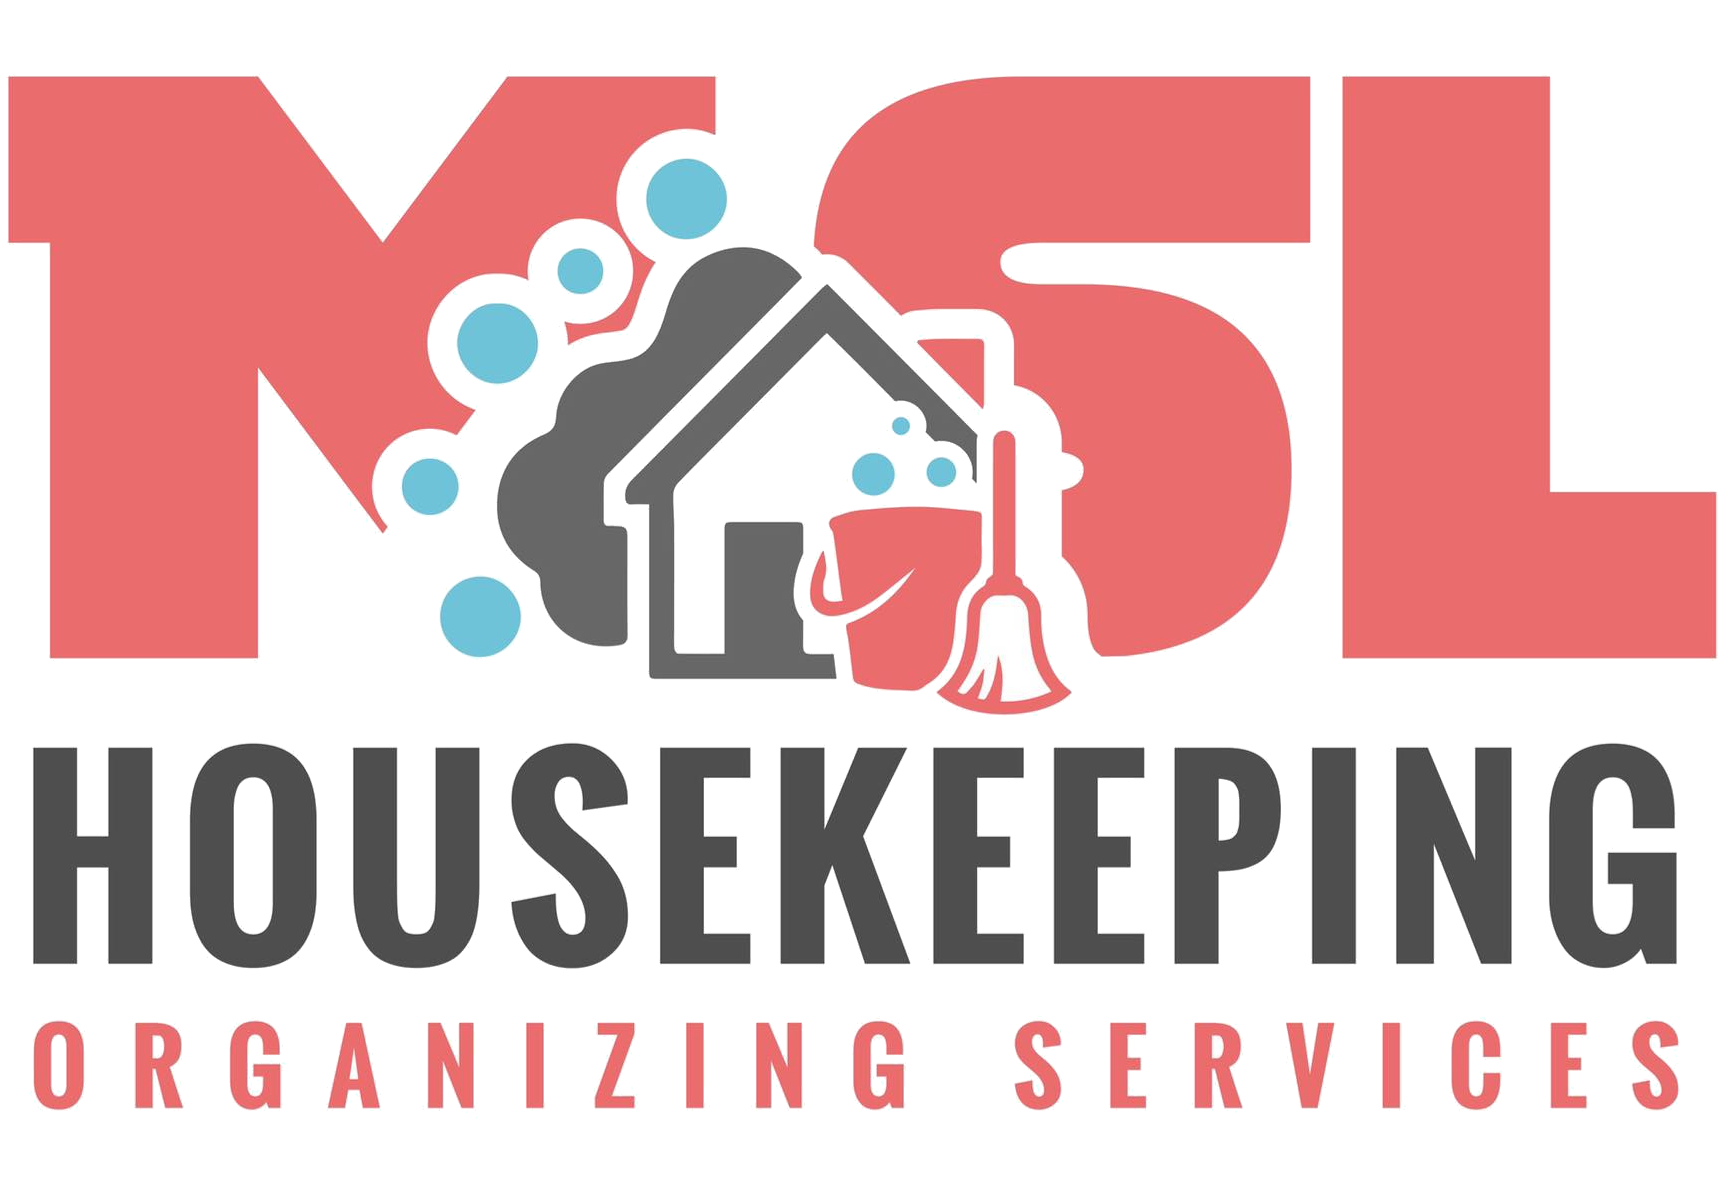 MSl Housecleaning